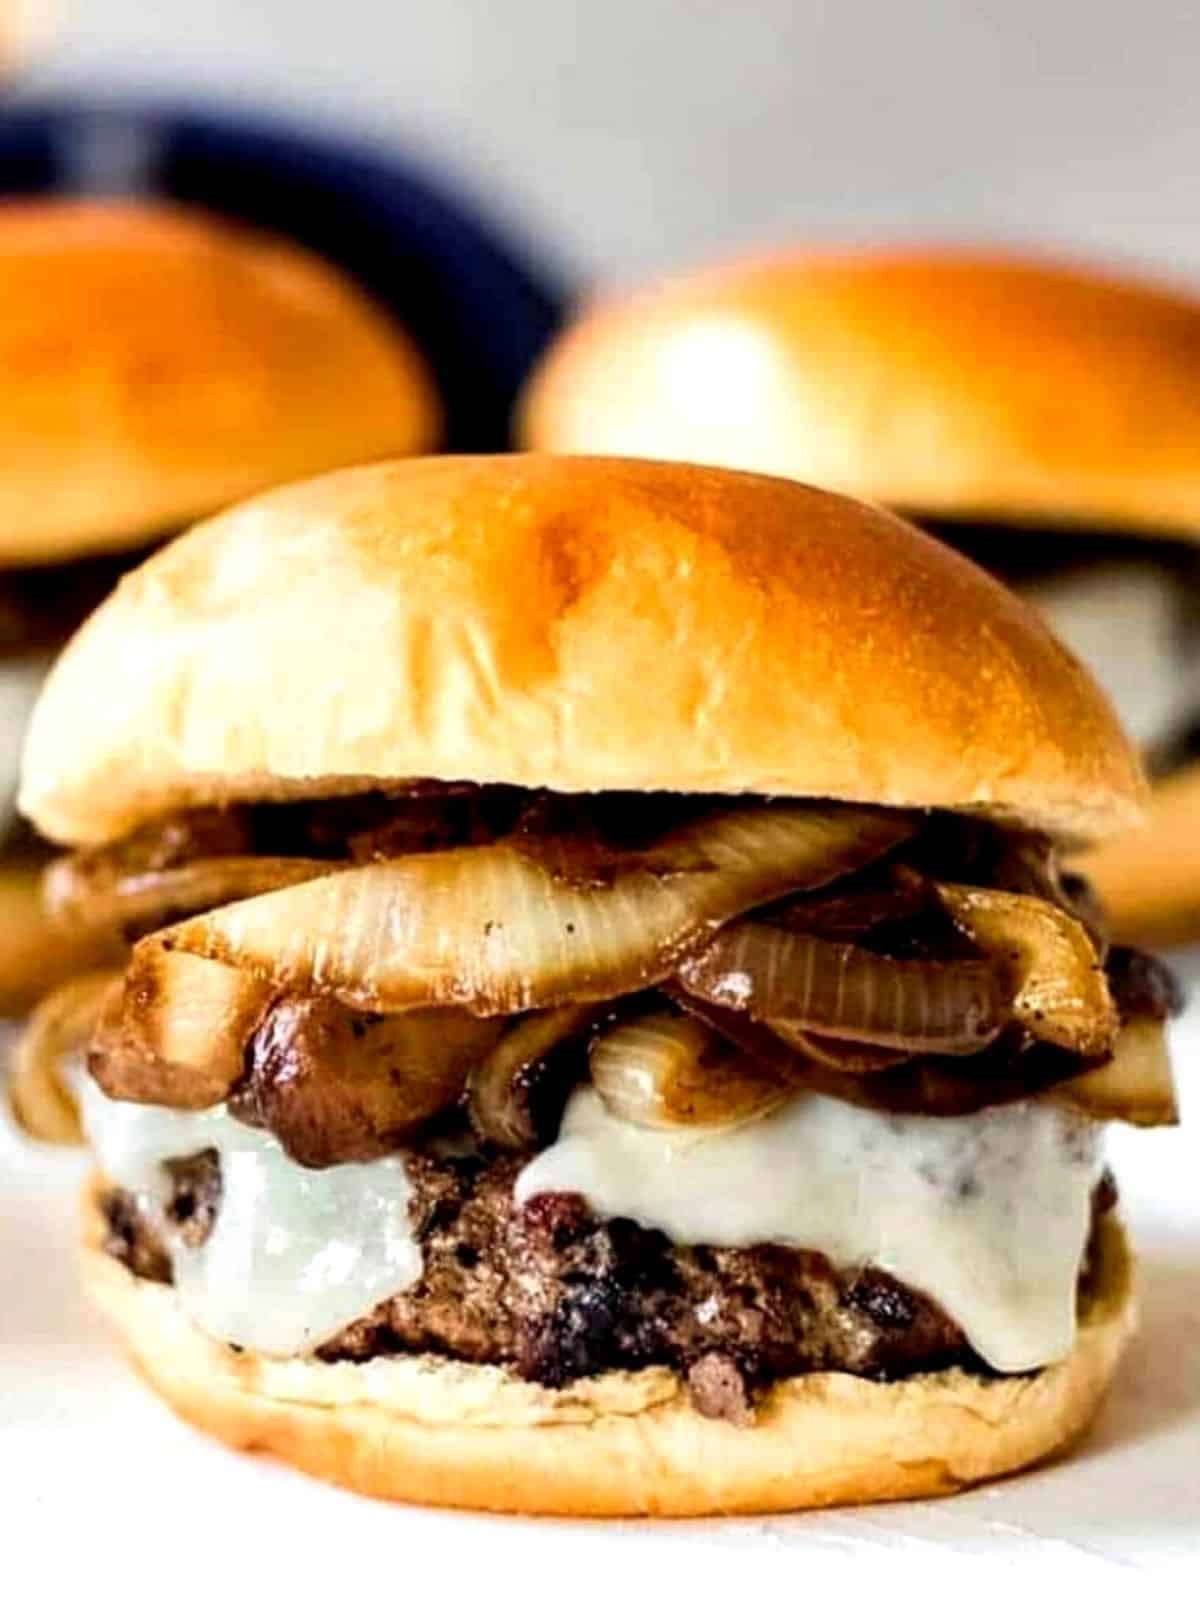 Burger with cheese, onions and mushrooms on a bun.